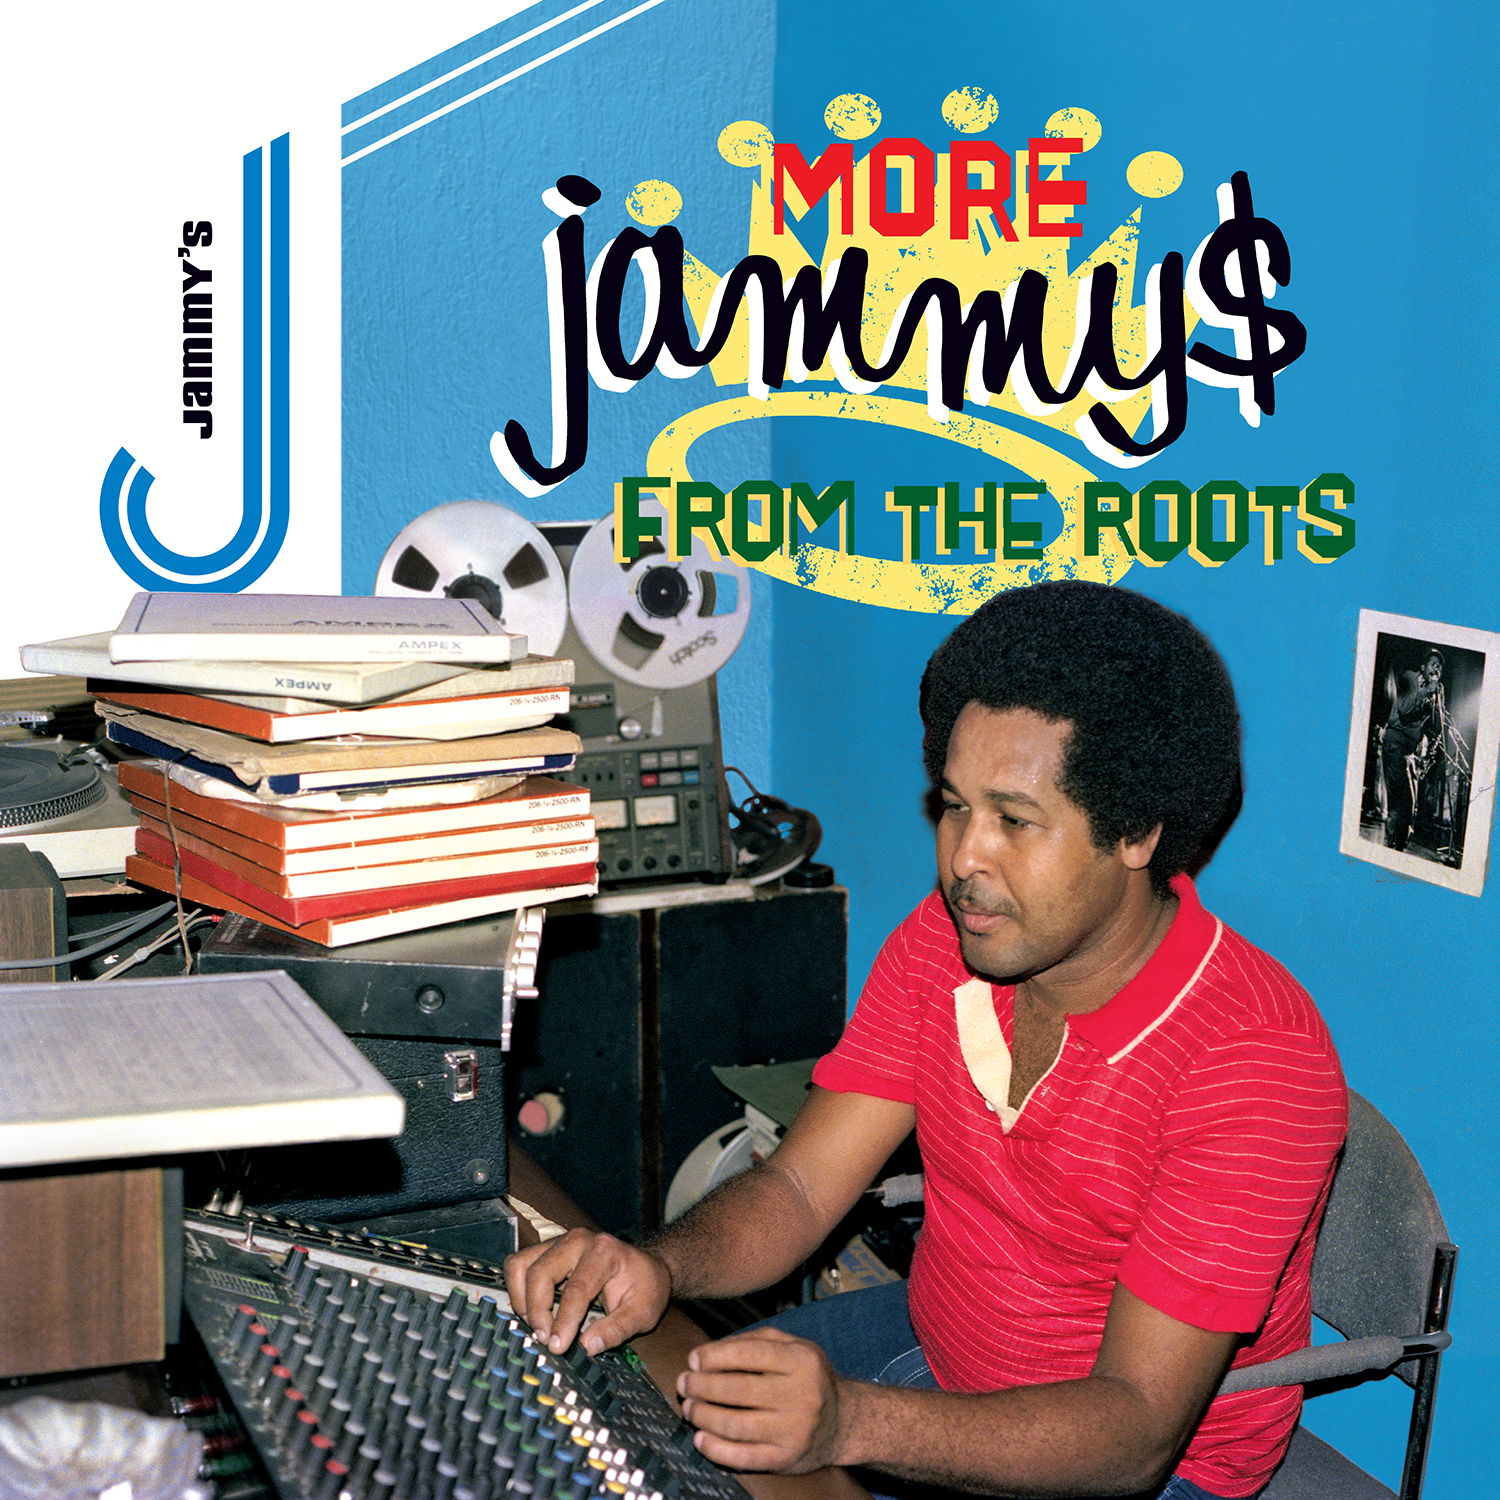 King Jammy – More Jammys From the Roots